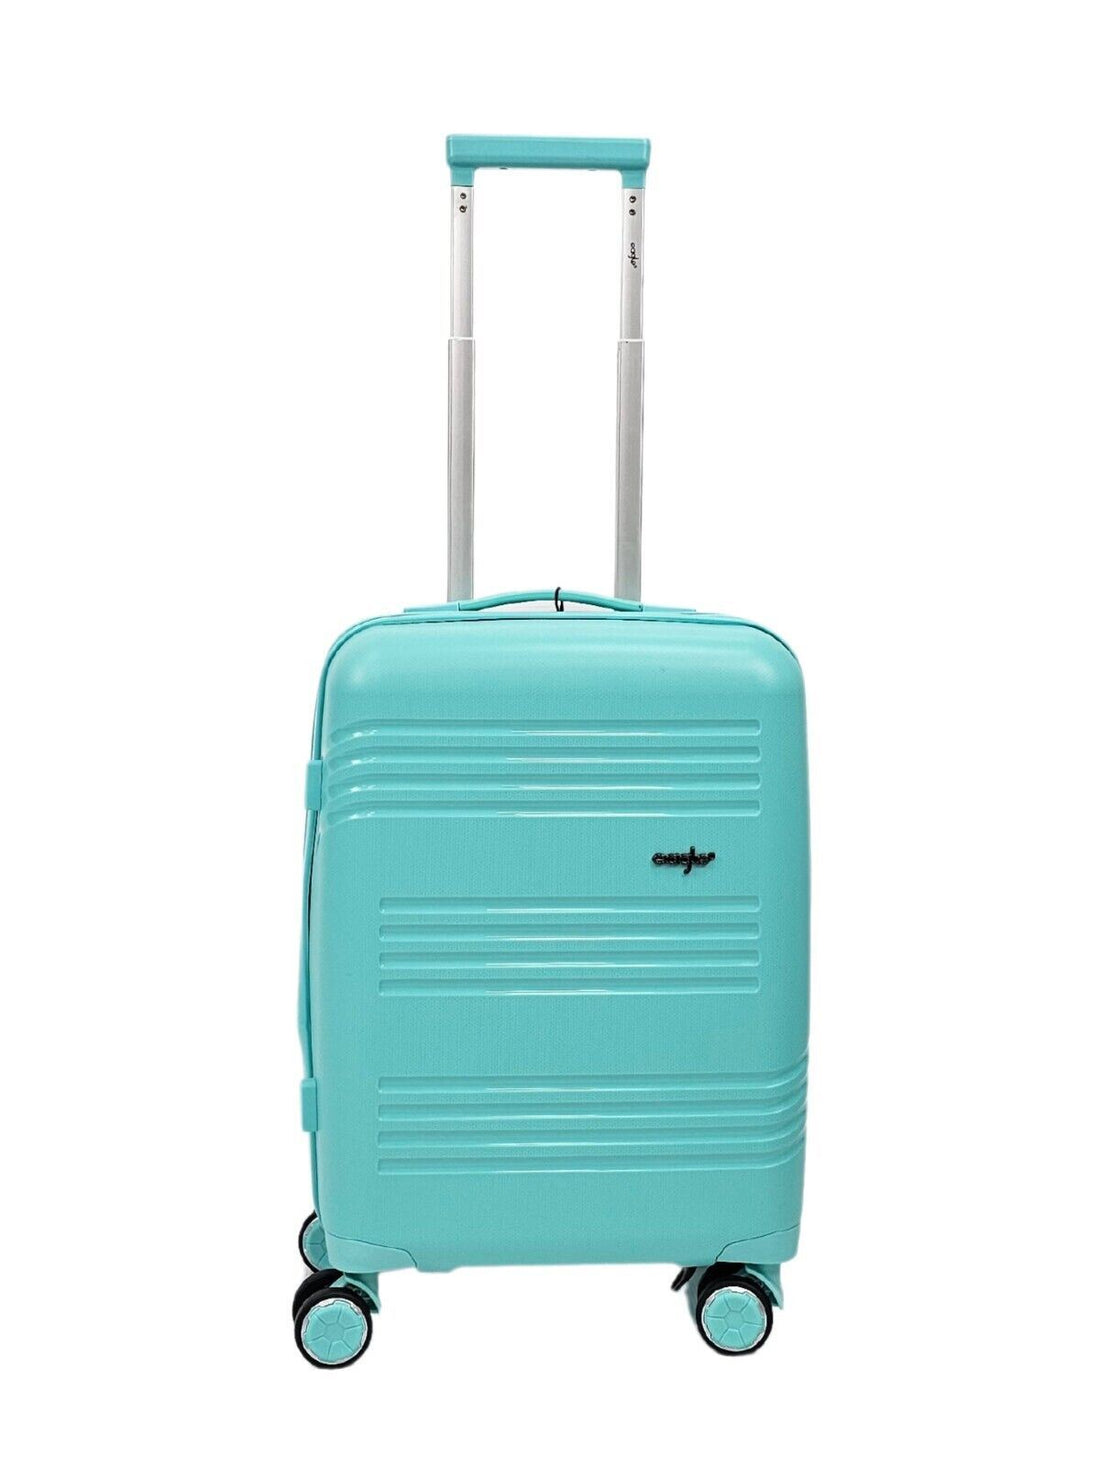 Brookwood Cabin Hard Shell Suitcase in Teal